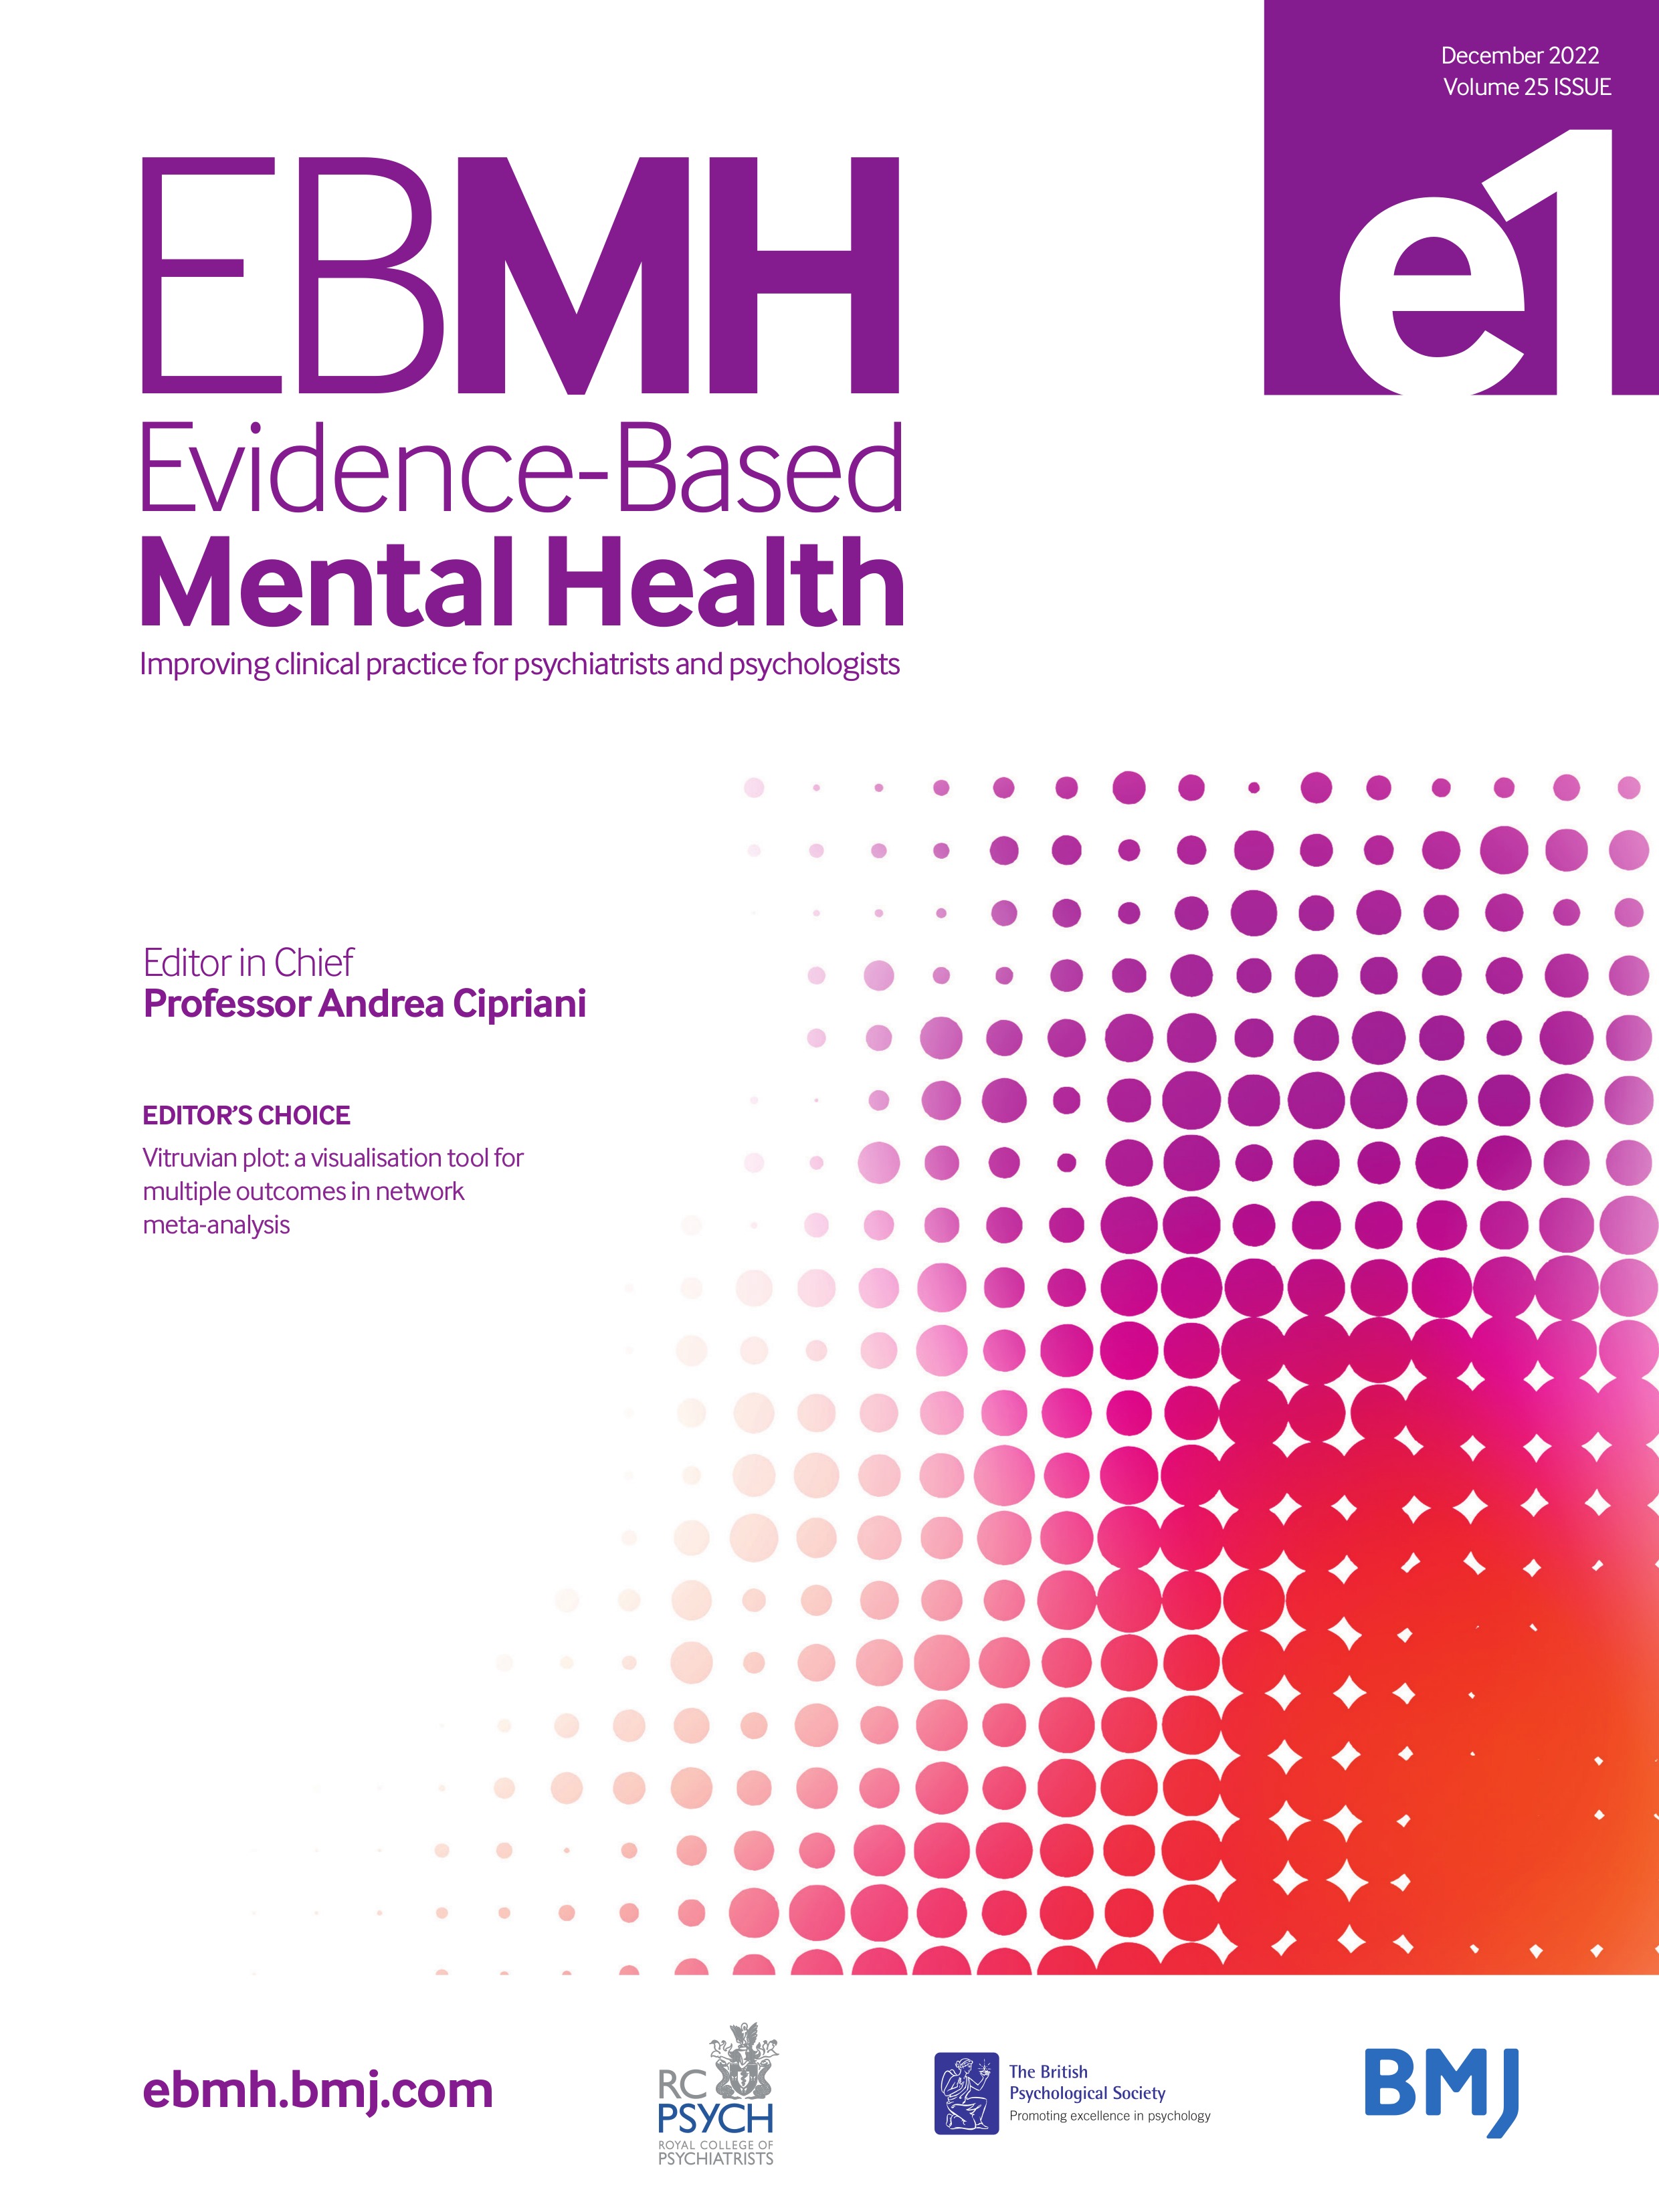 Digital cognitive-behavioural therapy to reduce suicidal ideation and behaviours: a systematic review and meta-analysis of individual participant data